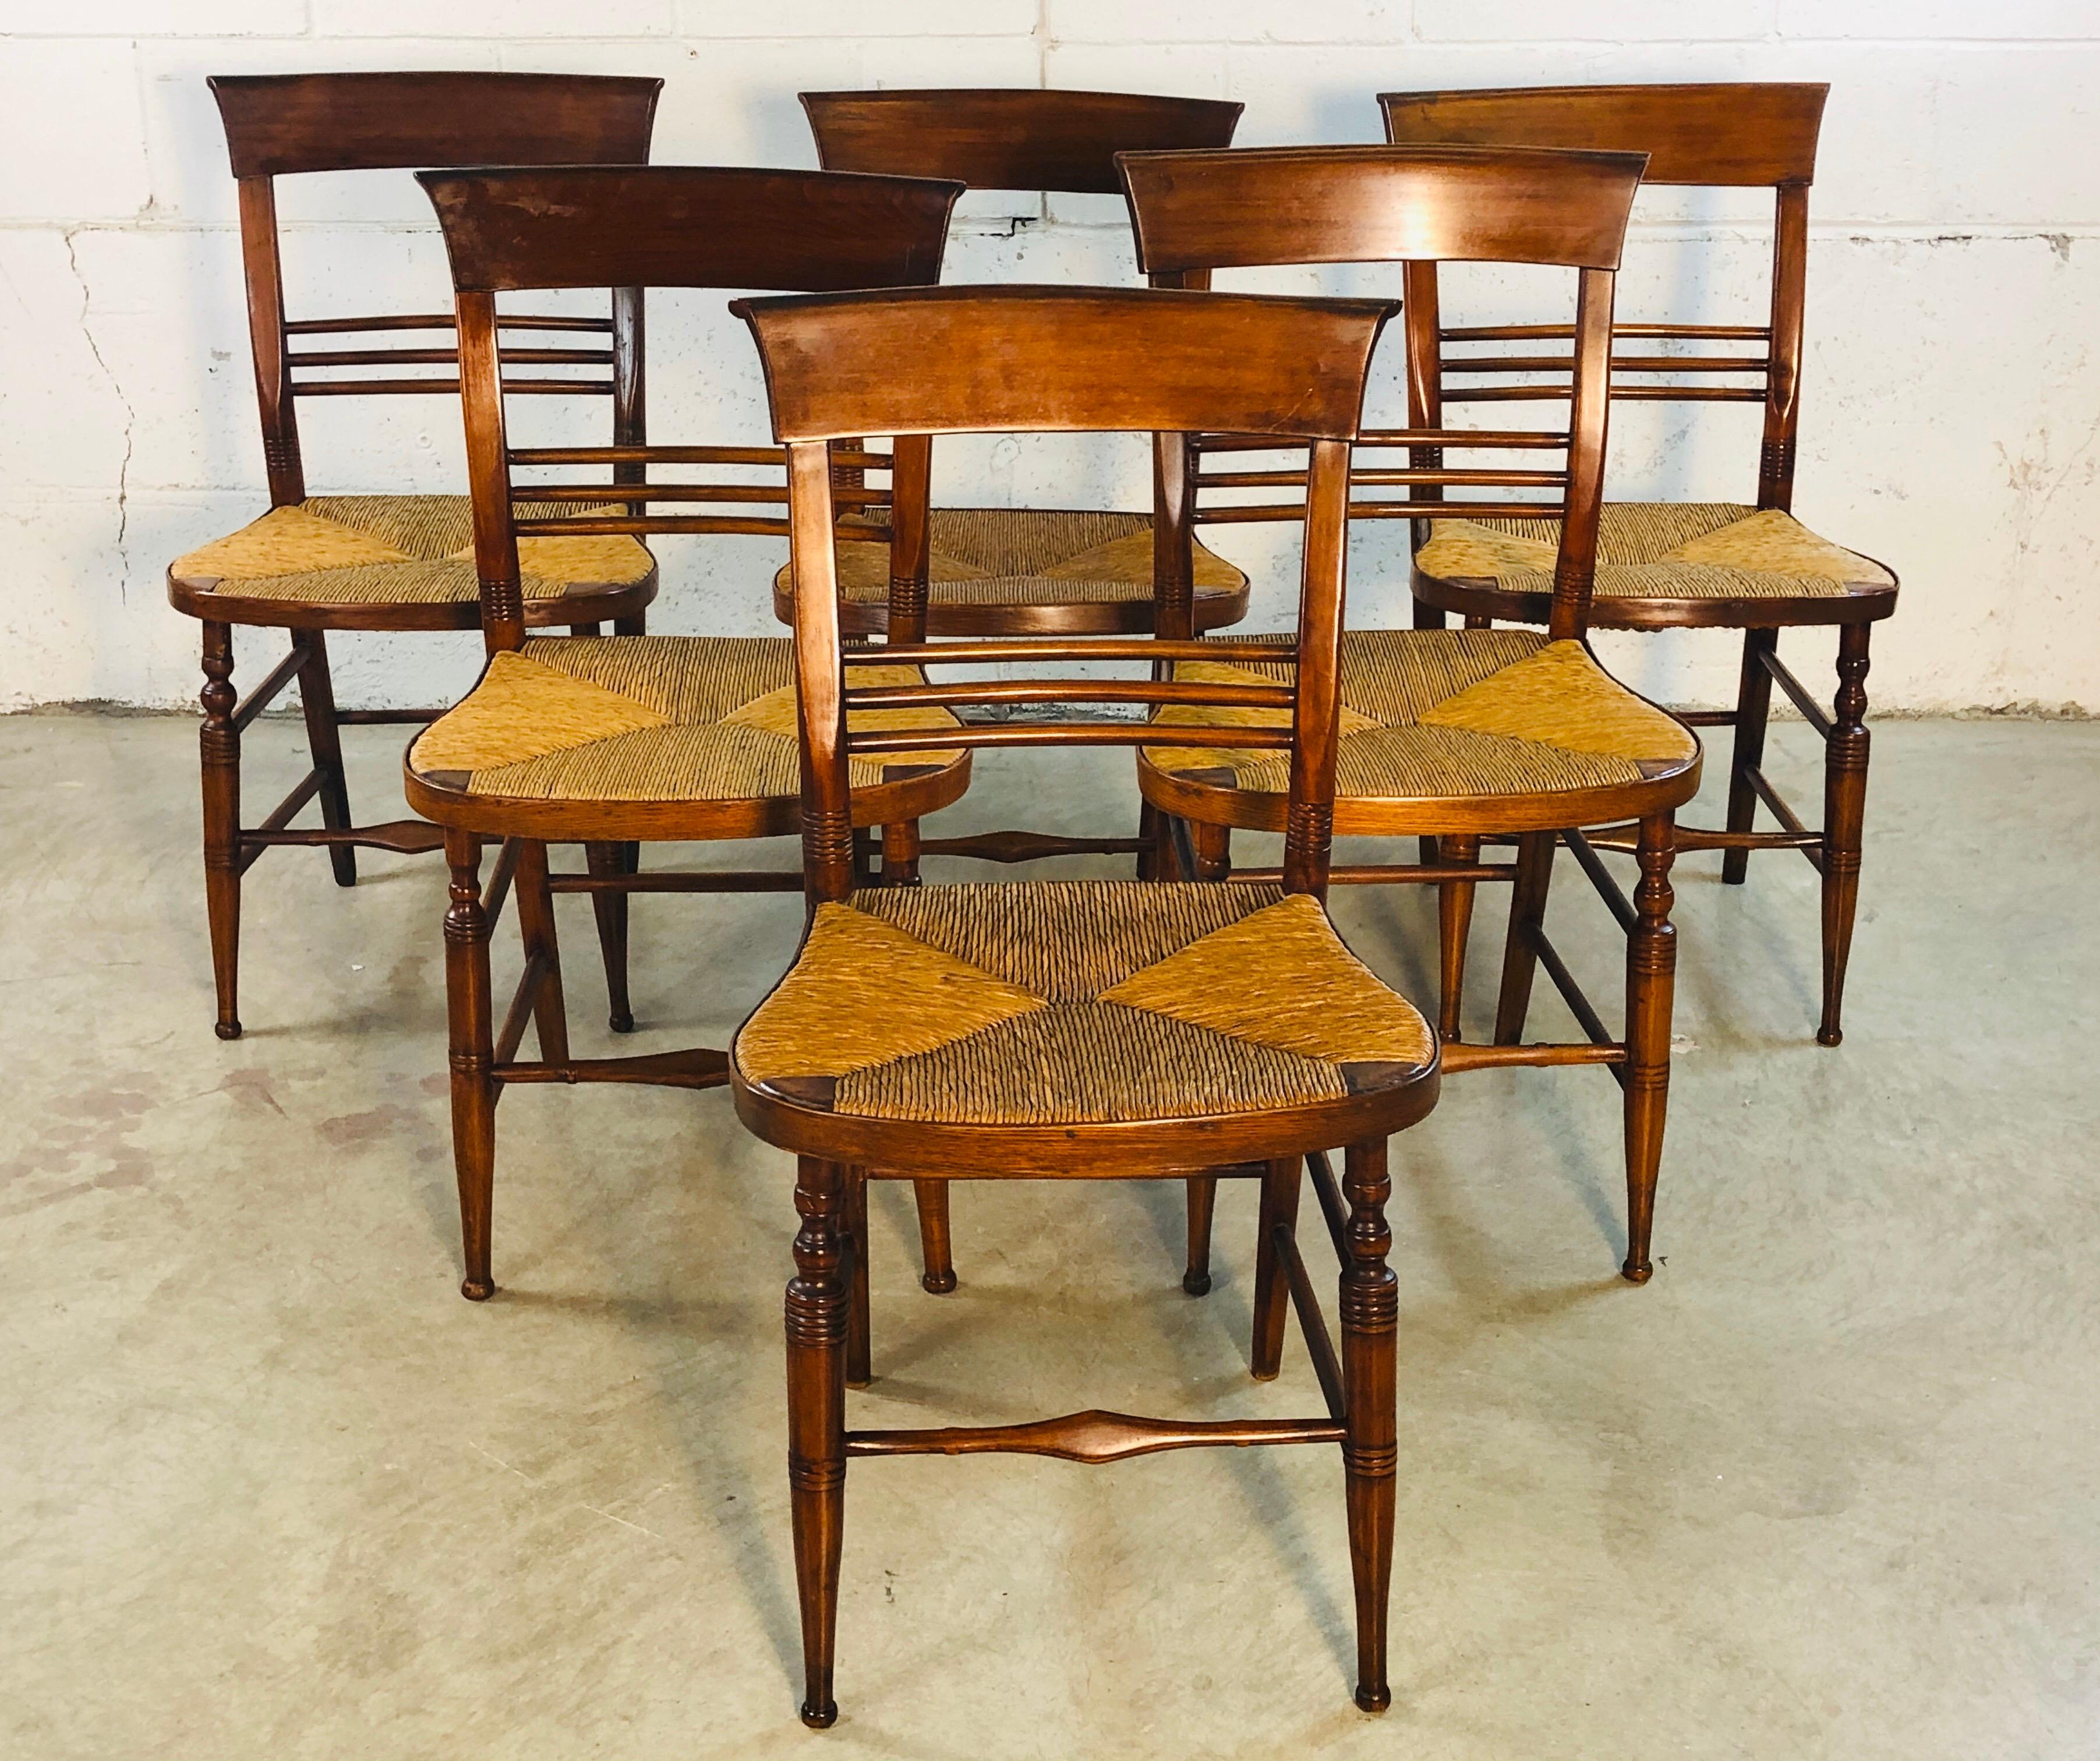 Antique rustic set of 6 mahogany rush seat dining chairs. A great set of sturdy chairs with the seats in excellent condition. Handmade craftsmanship with great design. Well cared for over the years and not abused. Excellent used condition with no